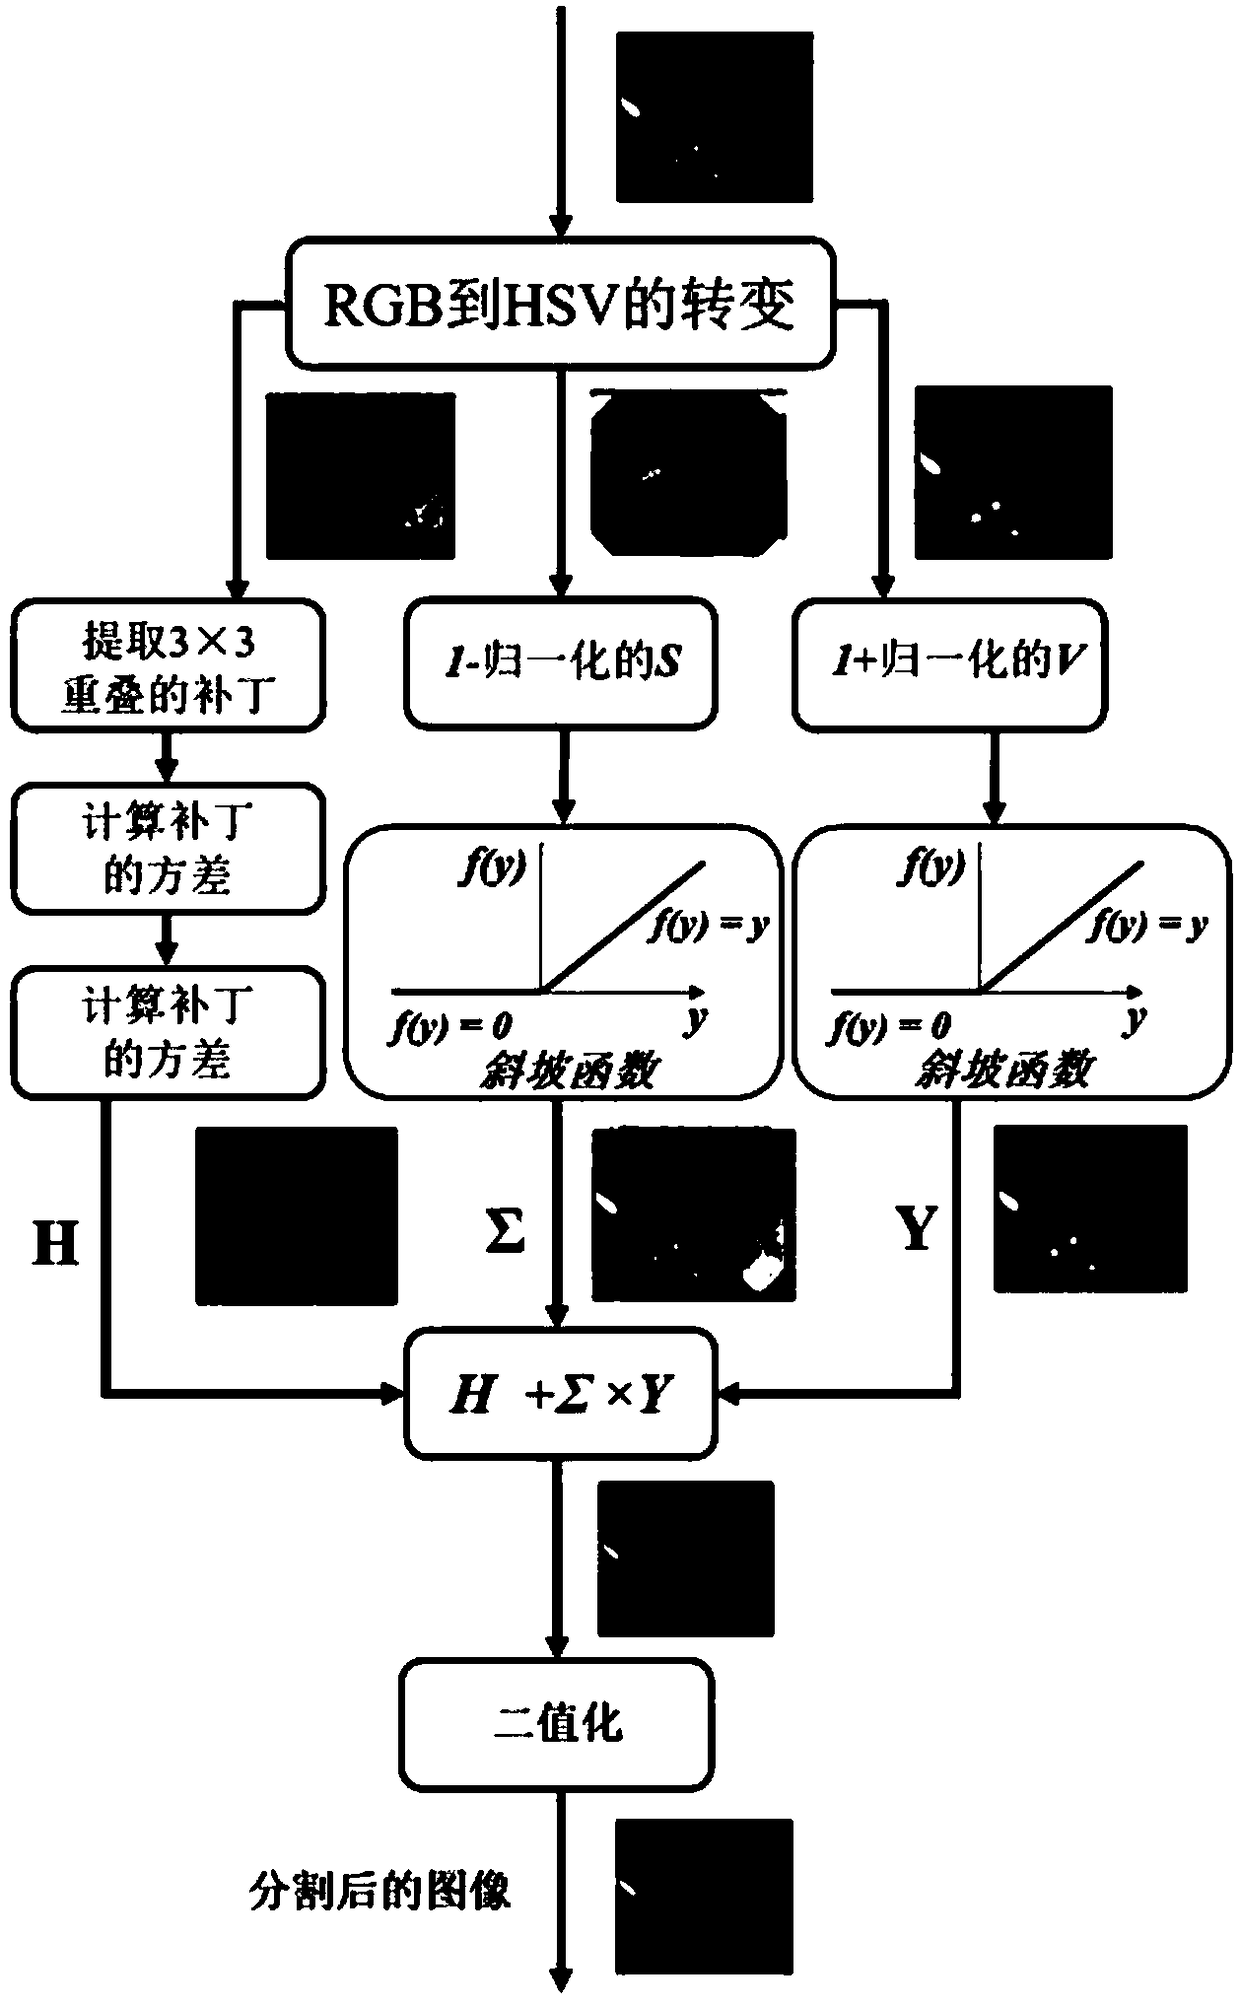 Mirror reflection detection method based on color space and support vector machine